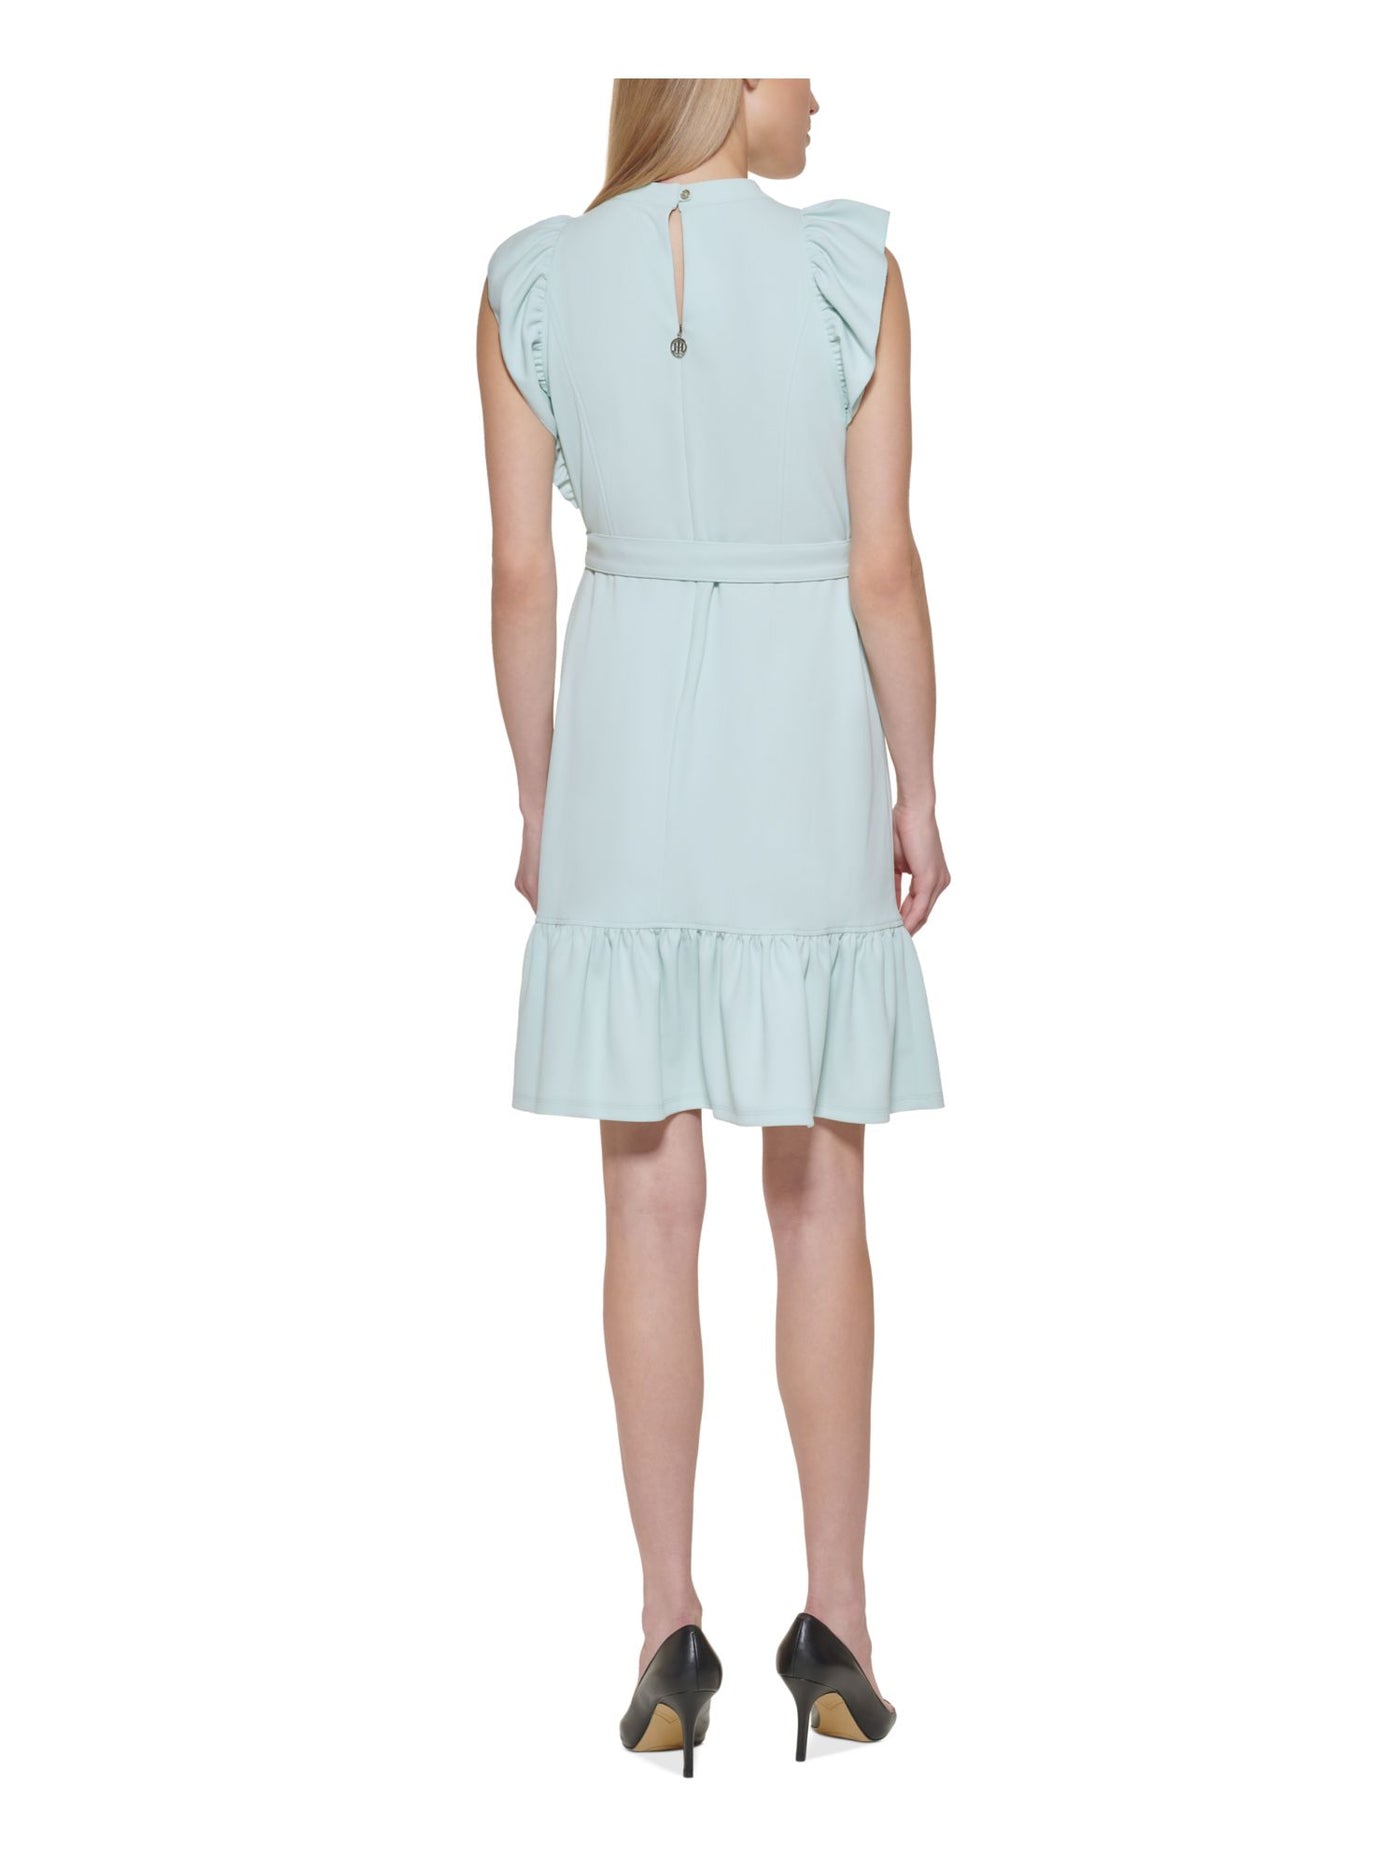 TOMMY HILFIGER Womens Light Blue Ruffled Belted Zippered Sleeveless Mock Neck Above The Knee Party Fit + Flare Dress 18